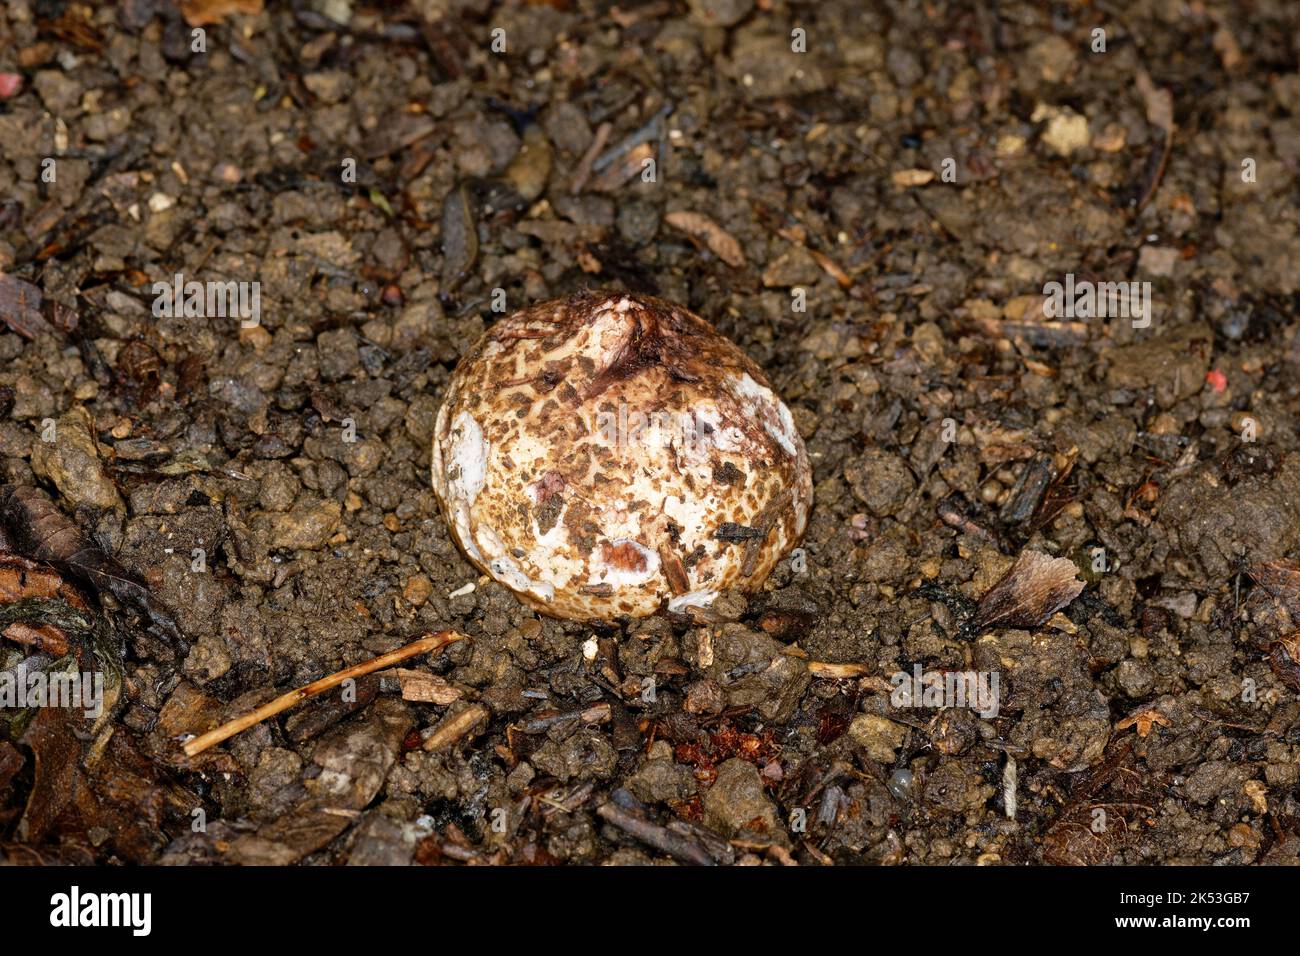 Collared Earthstar Fungi - Geastrum triplex, egg stage before opening Stock Photo